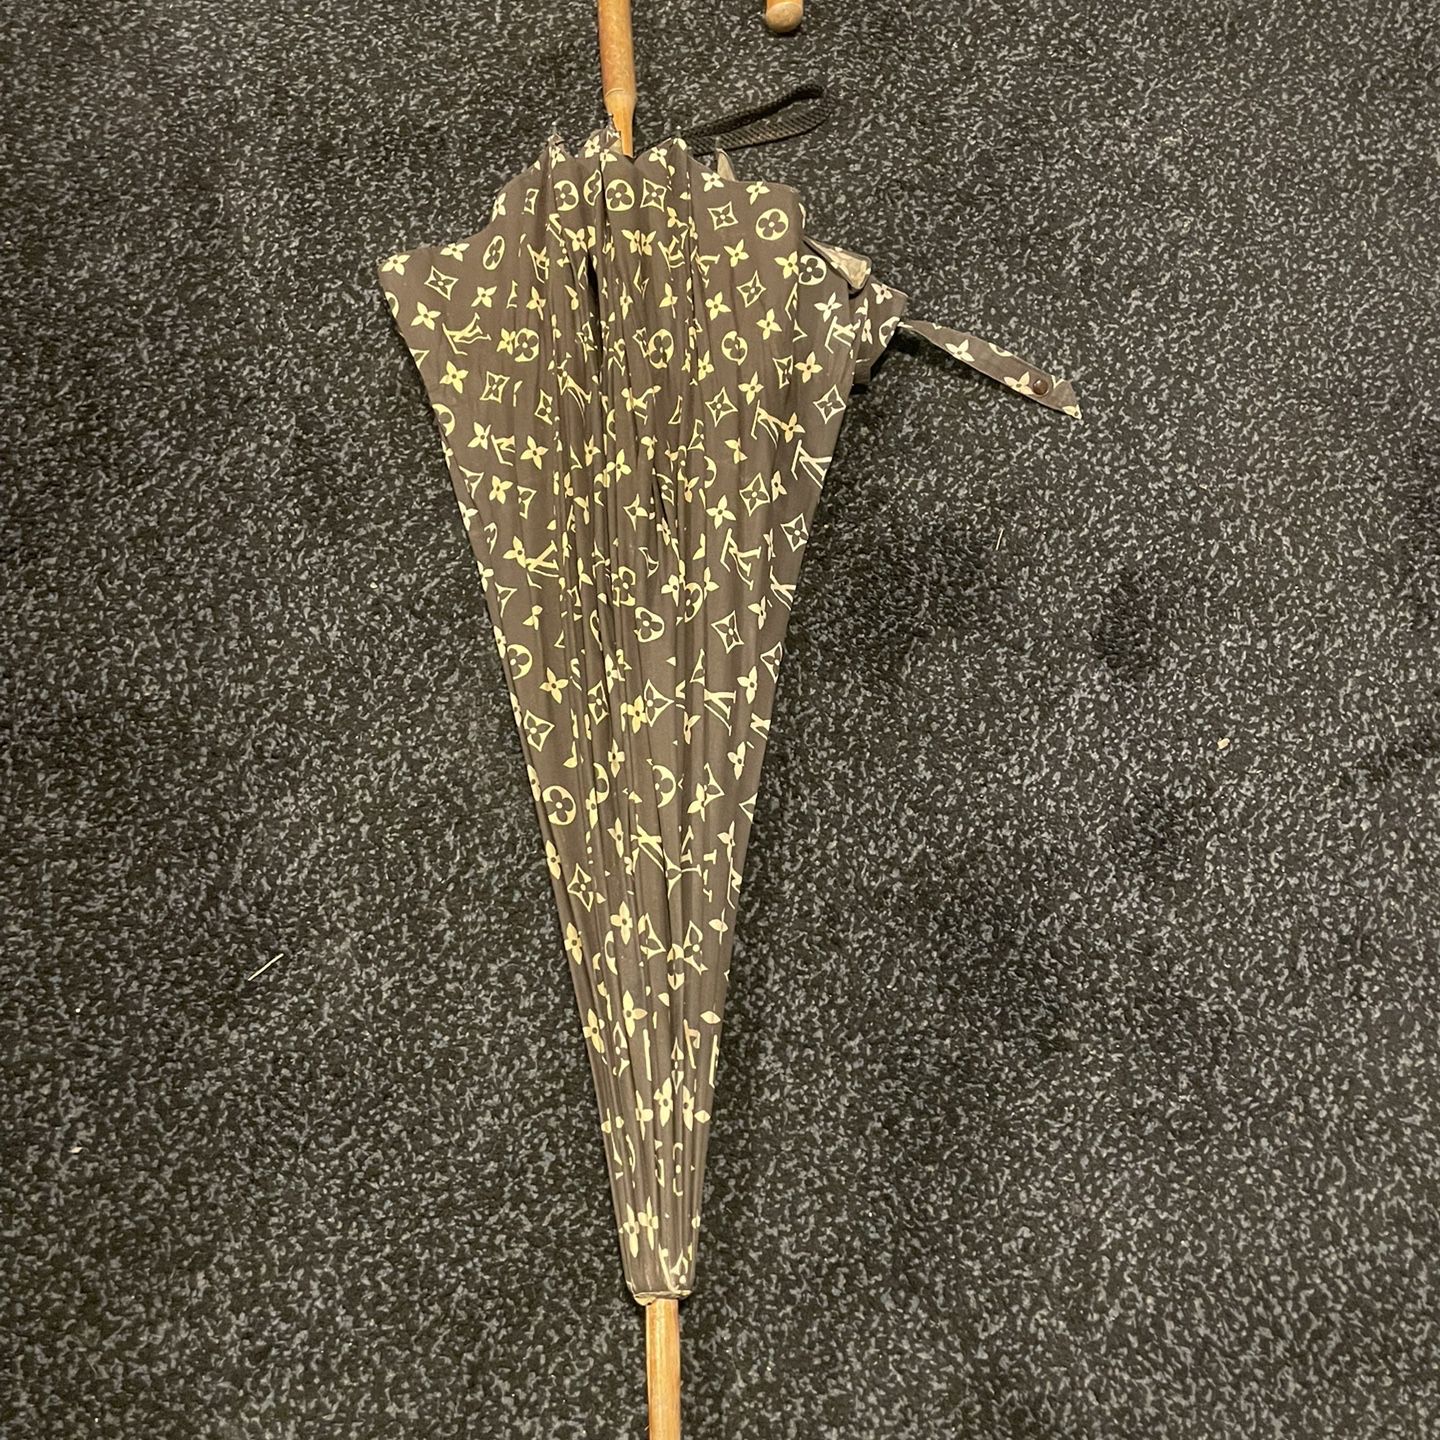 Sold at Auction: Faux Louis Vuitton Umbrella in the traditional brown  shade with logo pattern and wooden handle.